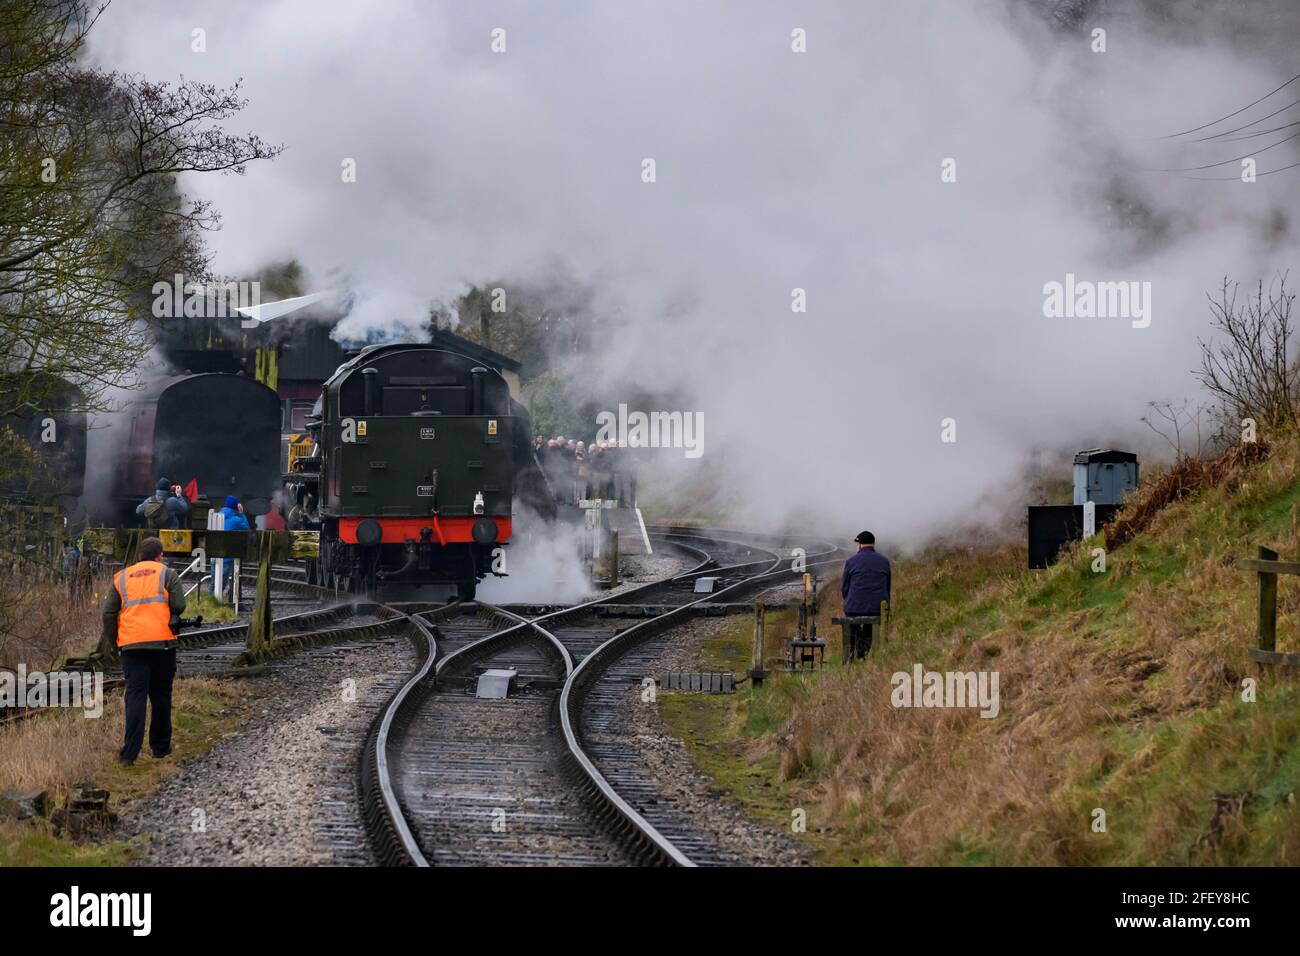 Historic steam train or loco puffing clouds of smoke (railway worker by points, enthusiasts watching) - Oxenhope Station sidings, Yorkshire England UK Stock Photo